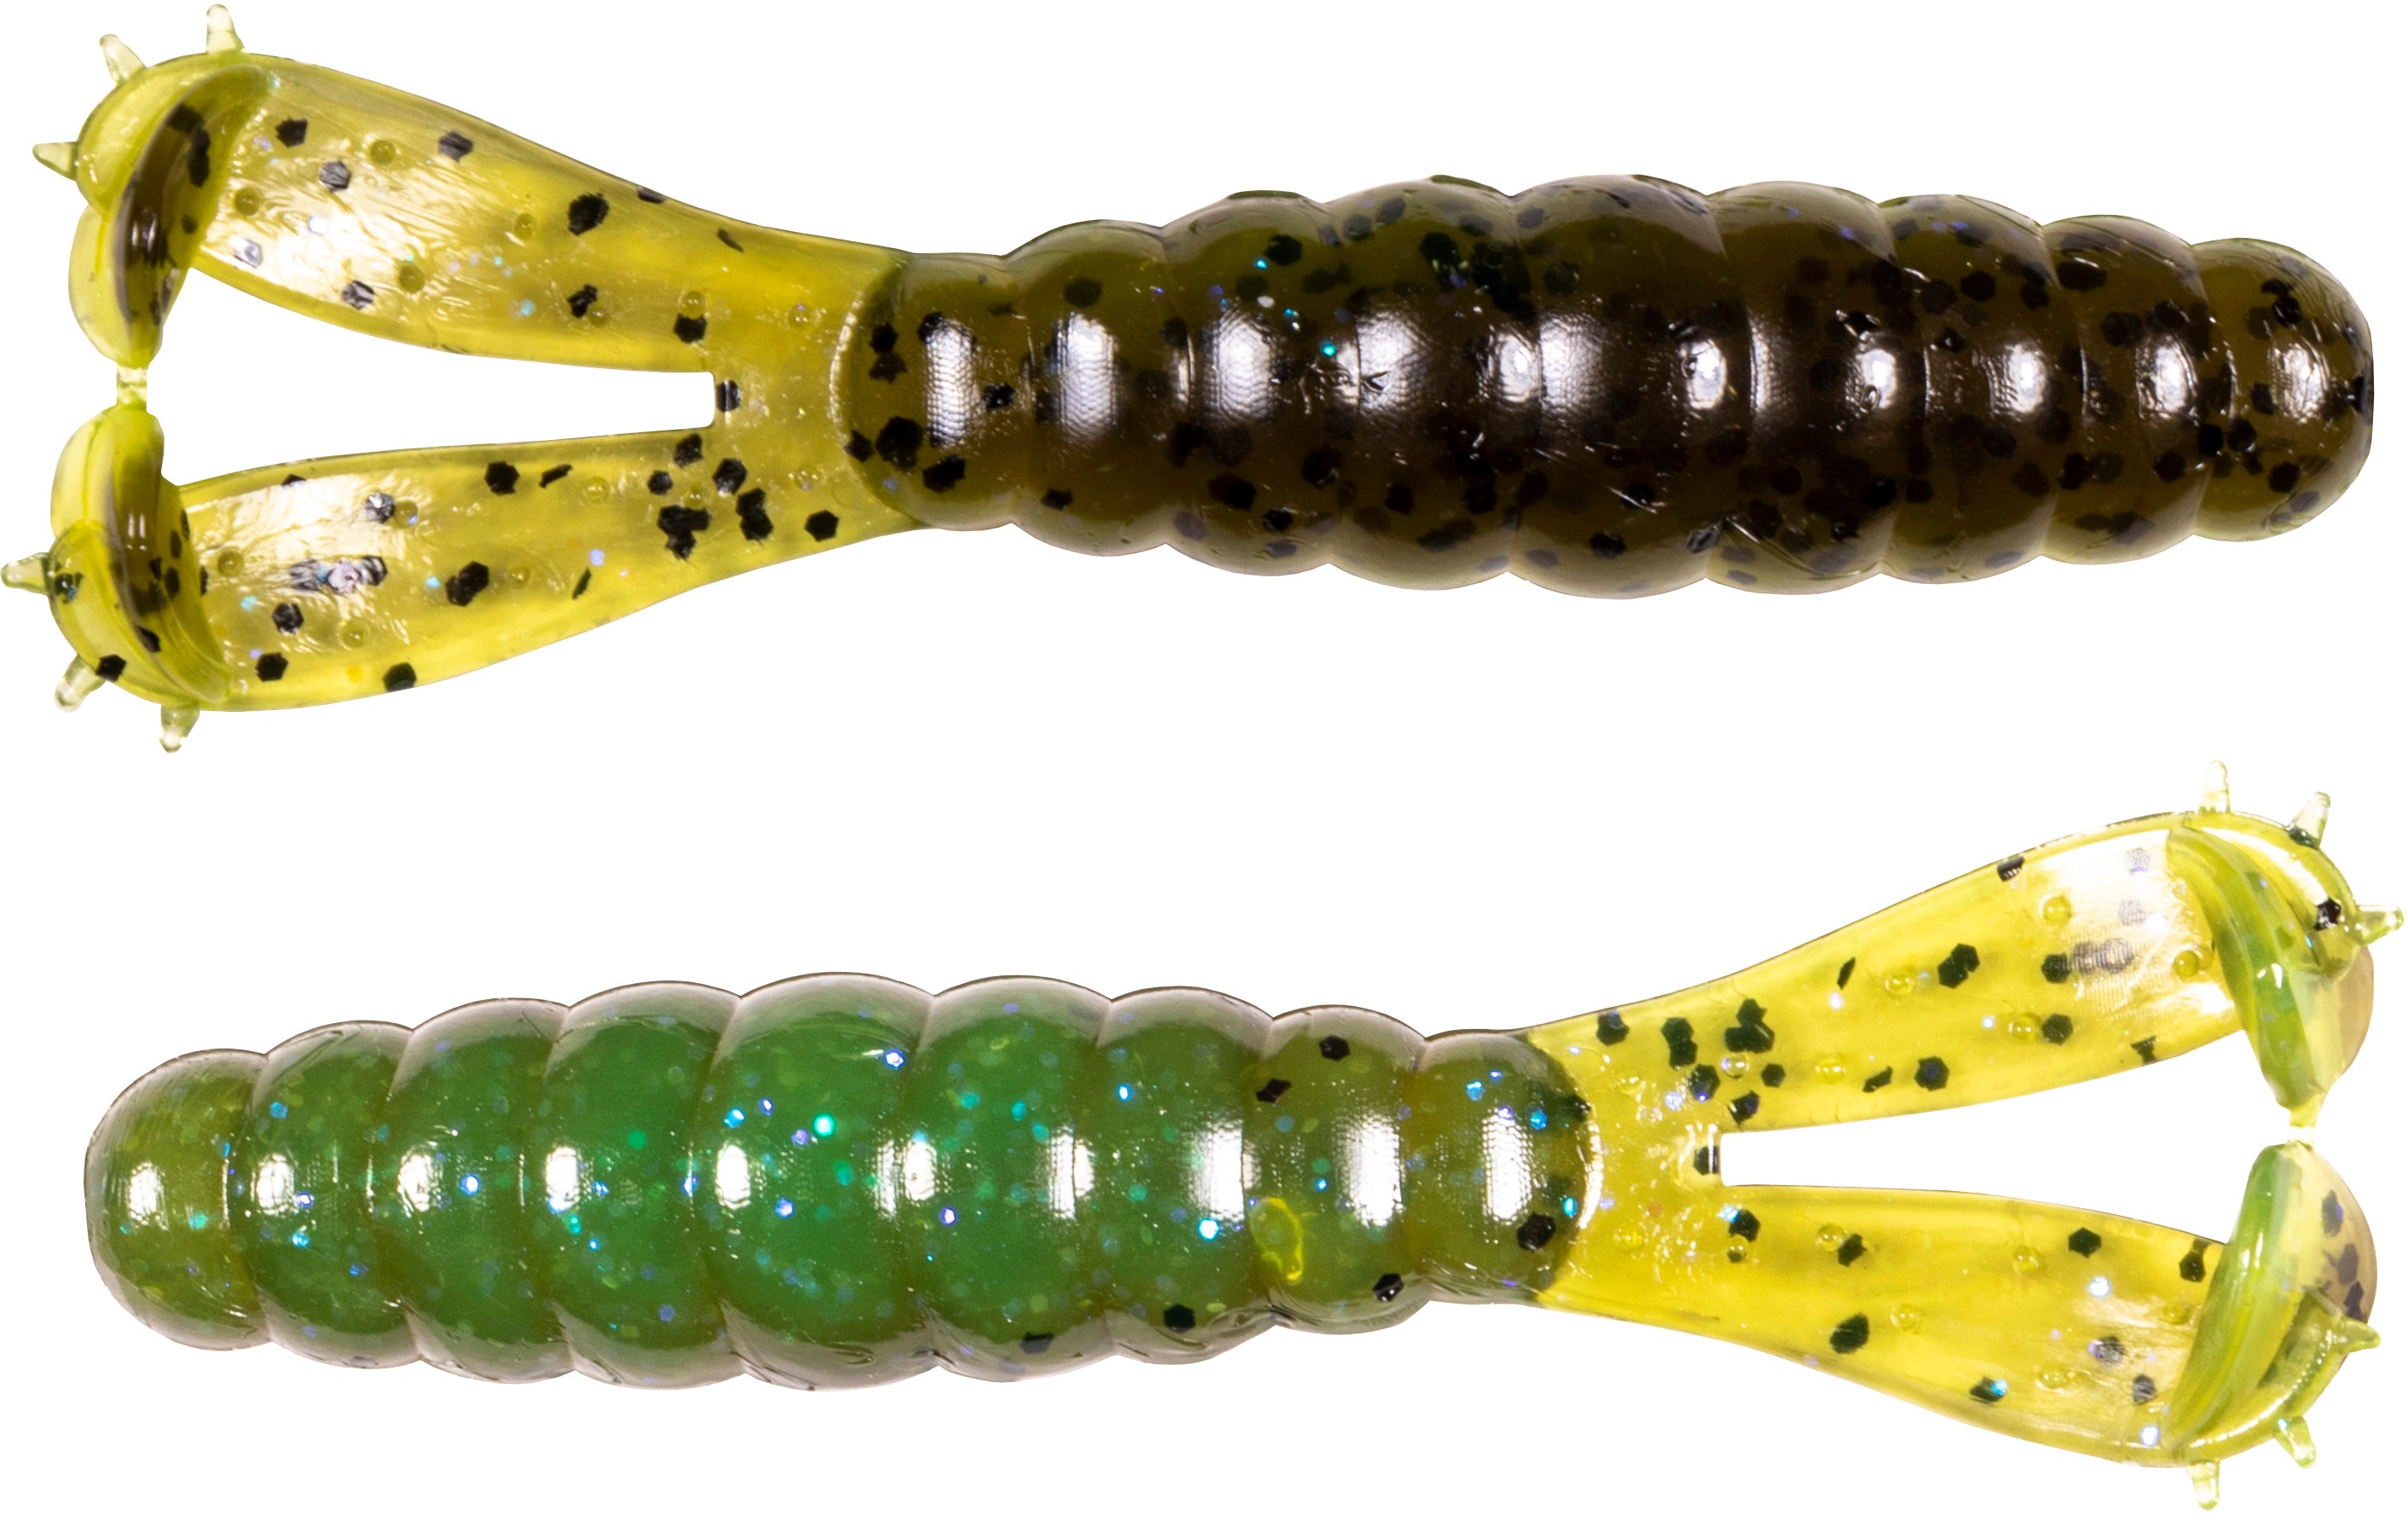 Z-Man GOAT 3 3/4 inch Soft Plastic Grub 4 pack — Discount Tackle